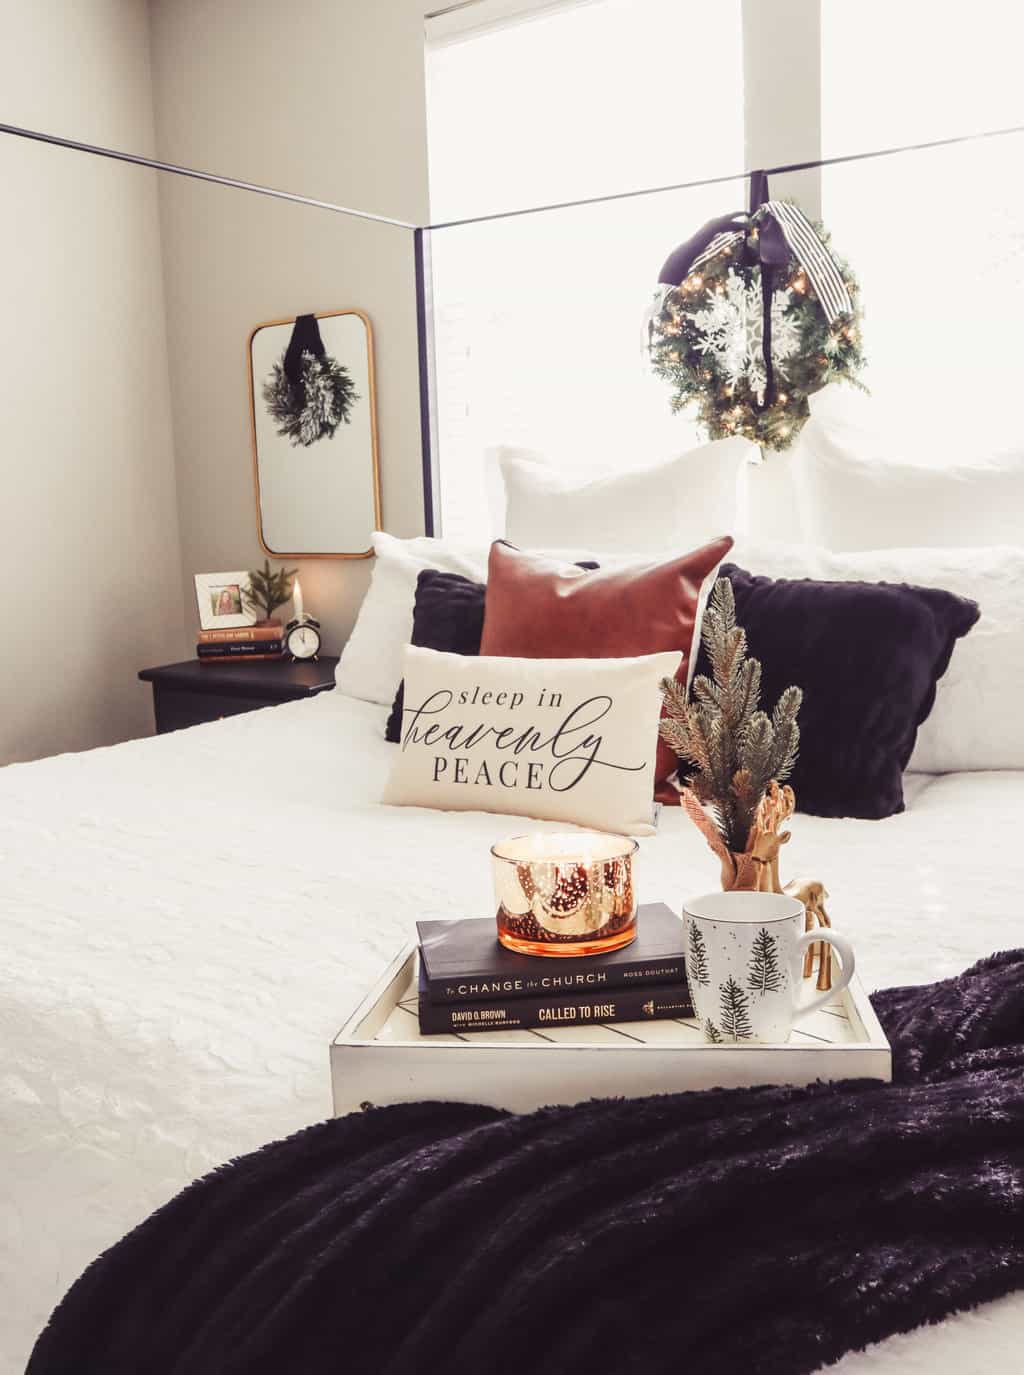 How to Decorate Your Master Bedroom for Christmas on a Budget